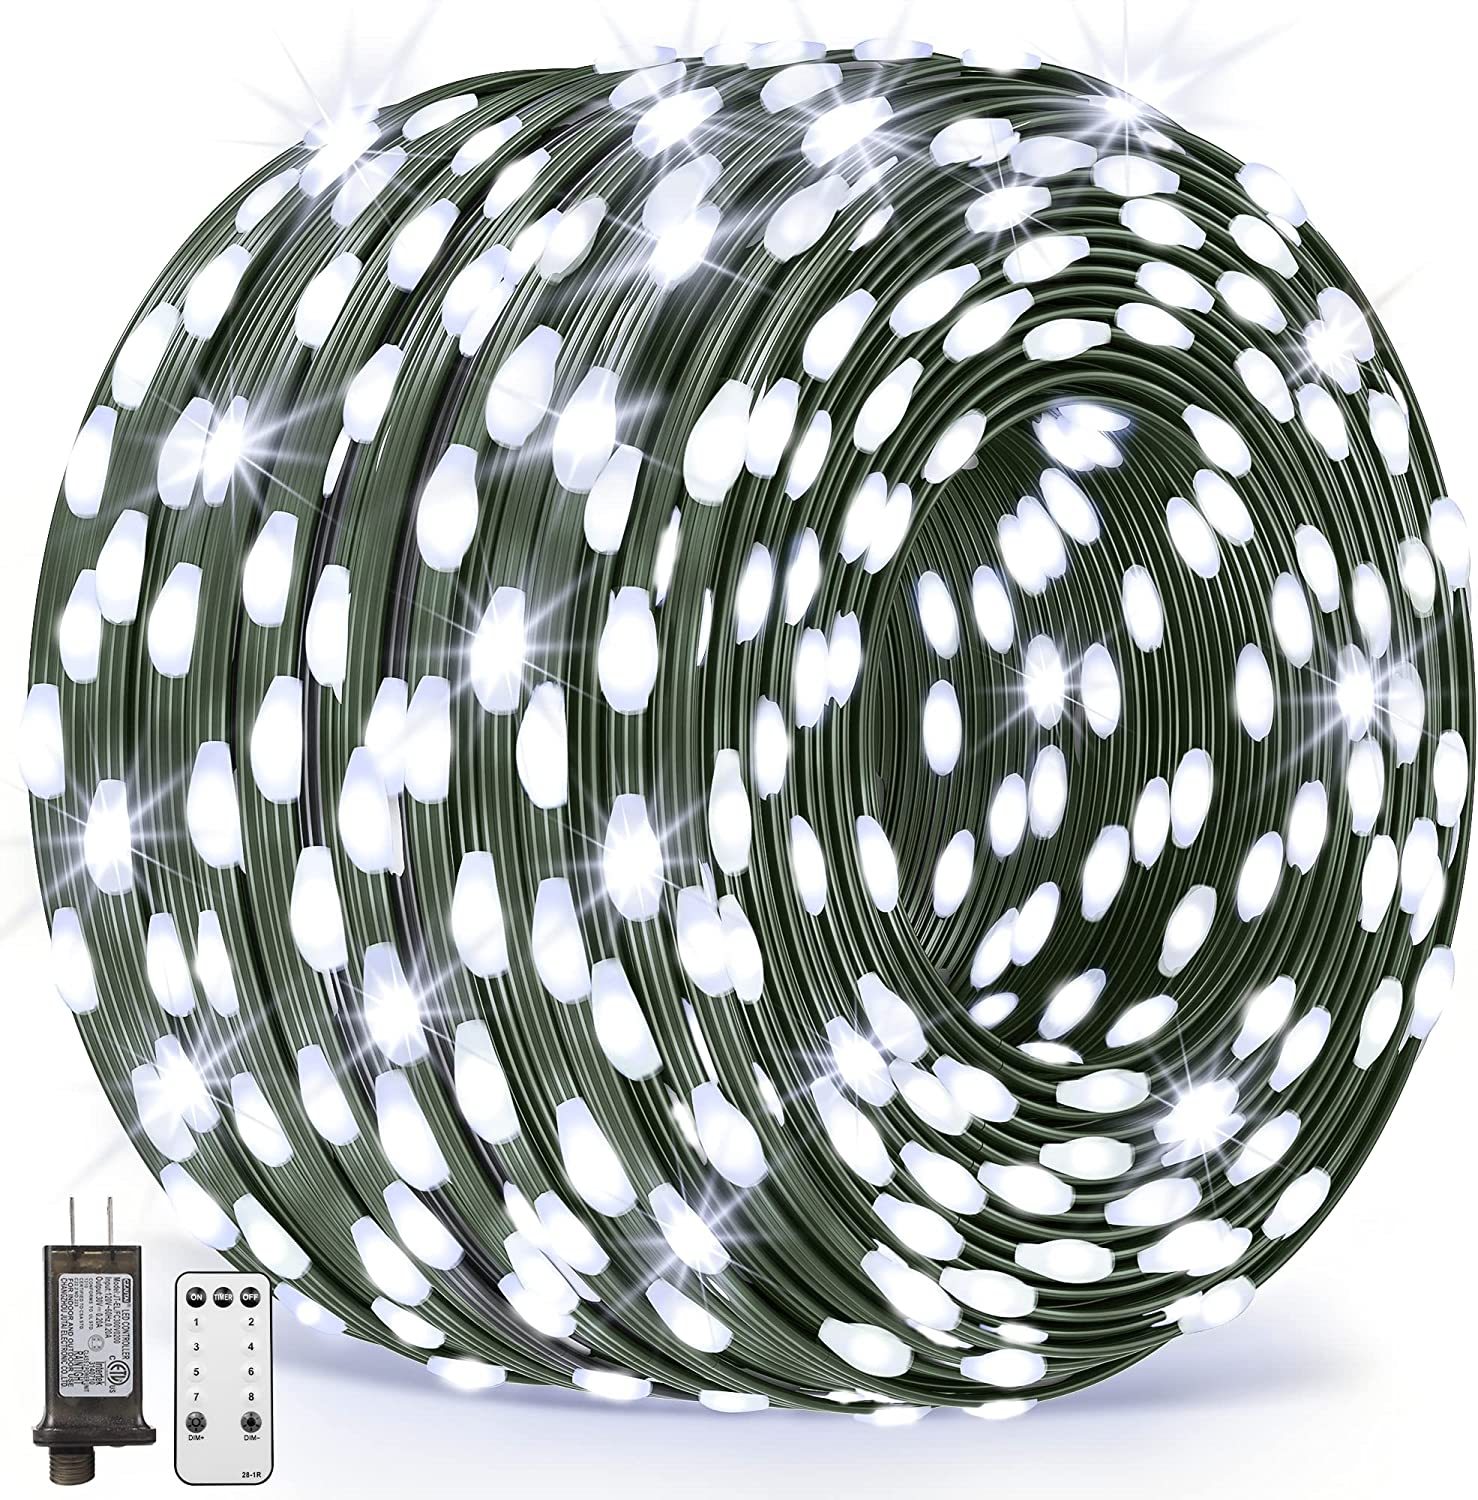 1 set 1000 led christmas lights 405ft outdoor string lights plug in fairy lights green wire with remote timer 8 lighting modes decorations lights for tree xmas indoor wedding garden multi colored warm white cool white details 10